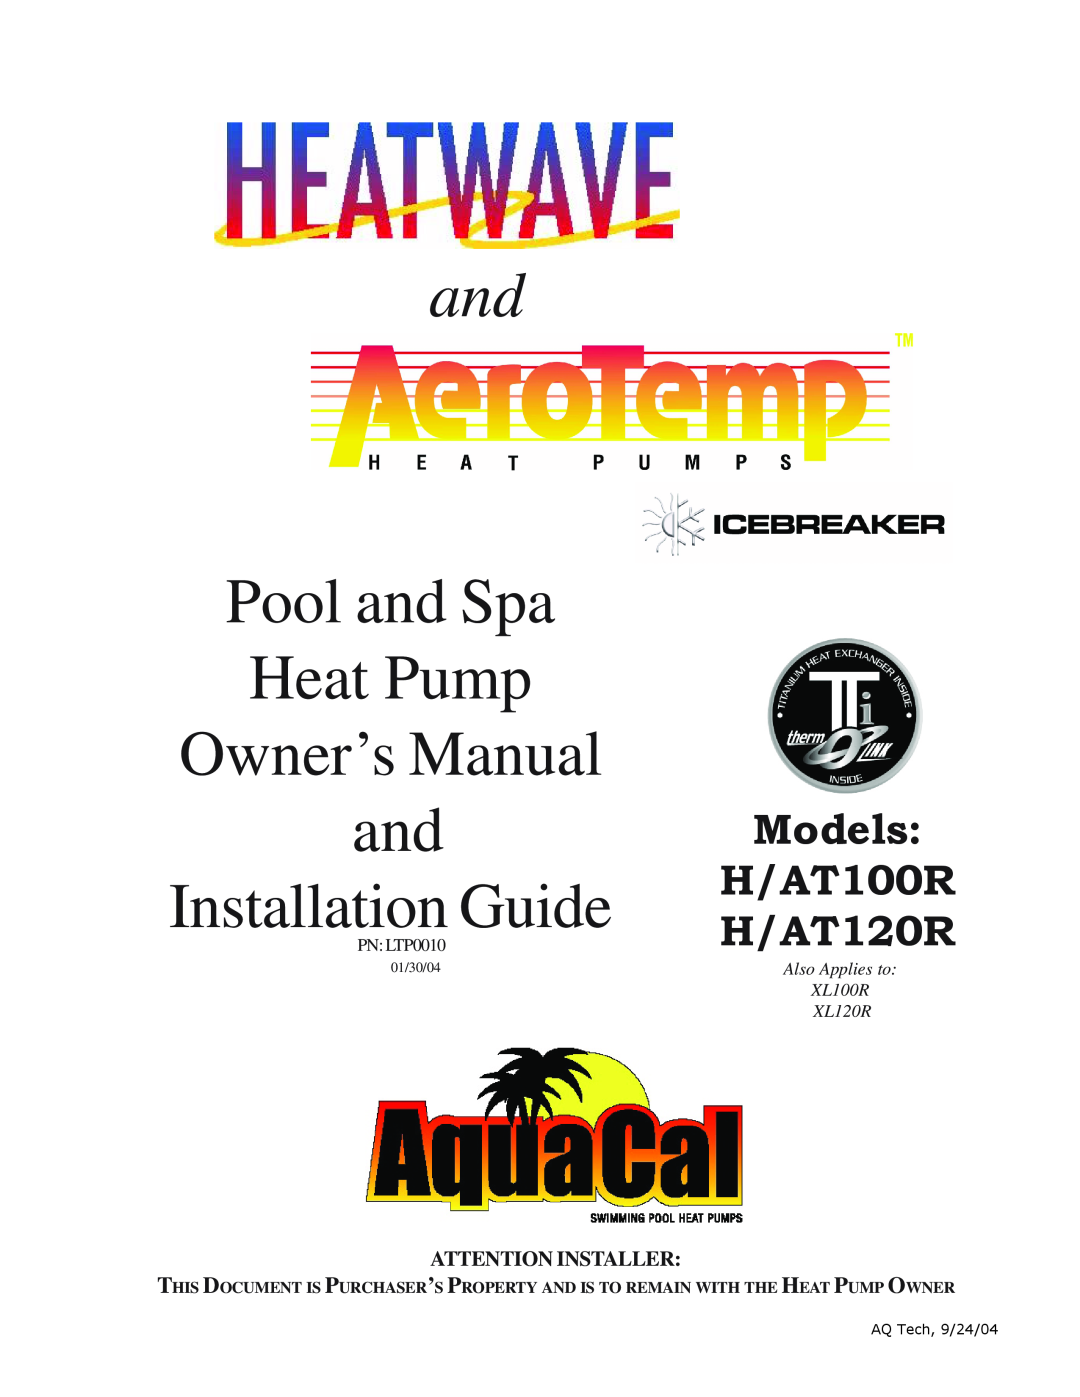 Aquacal owner manual Installation Guide, Models H/AT100R H/AT120R, Also Applies to XL100R XL120R, 1/7/041 